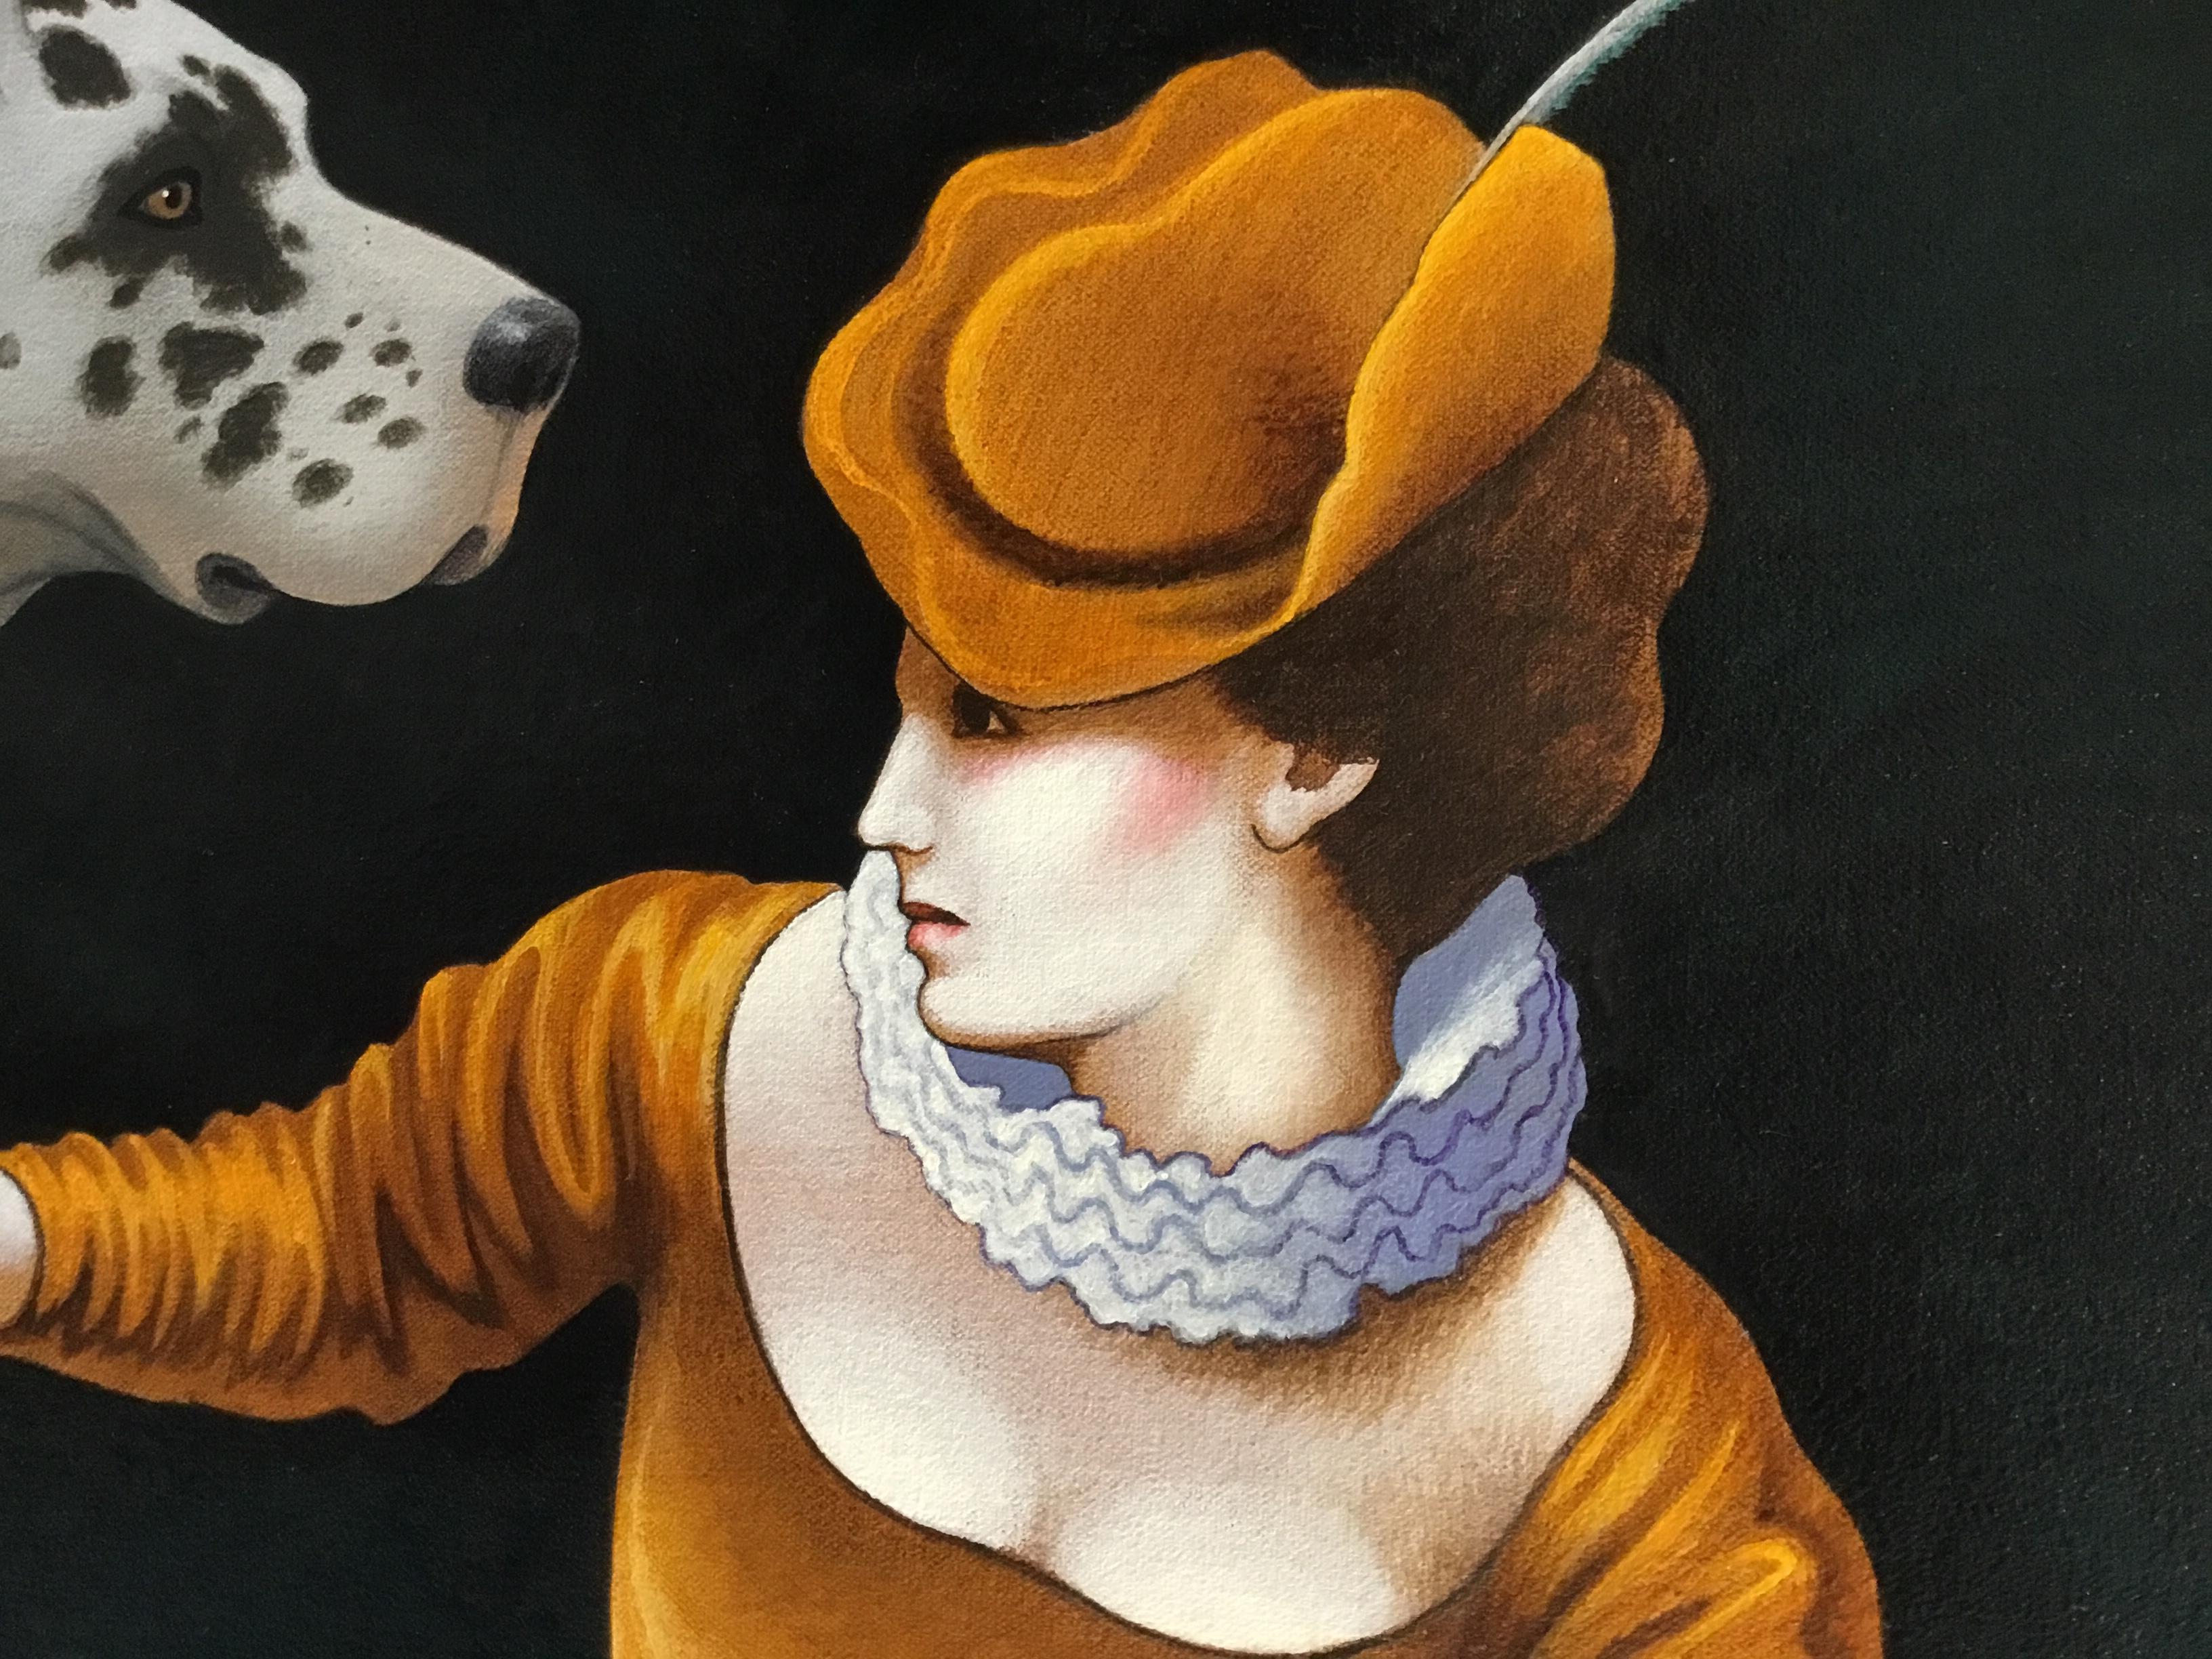 Liaisons VII
Original painting by Lynn Curlee
One of a series of eight paintings based upon 17th century French engravings.
Each painting includes a man, a woman, and a dog.
Mr Curlee is a gallery painter, and author or illustrator of award